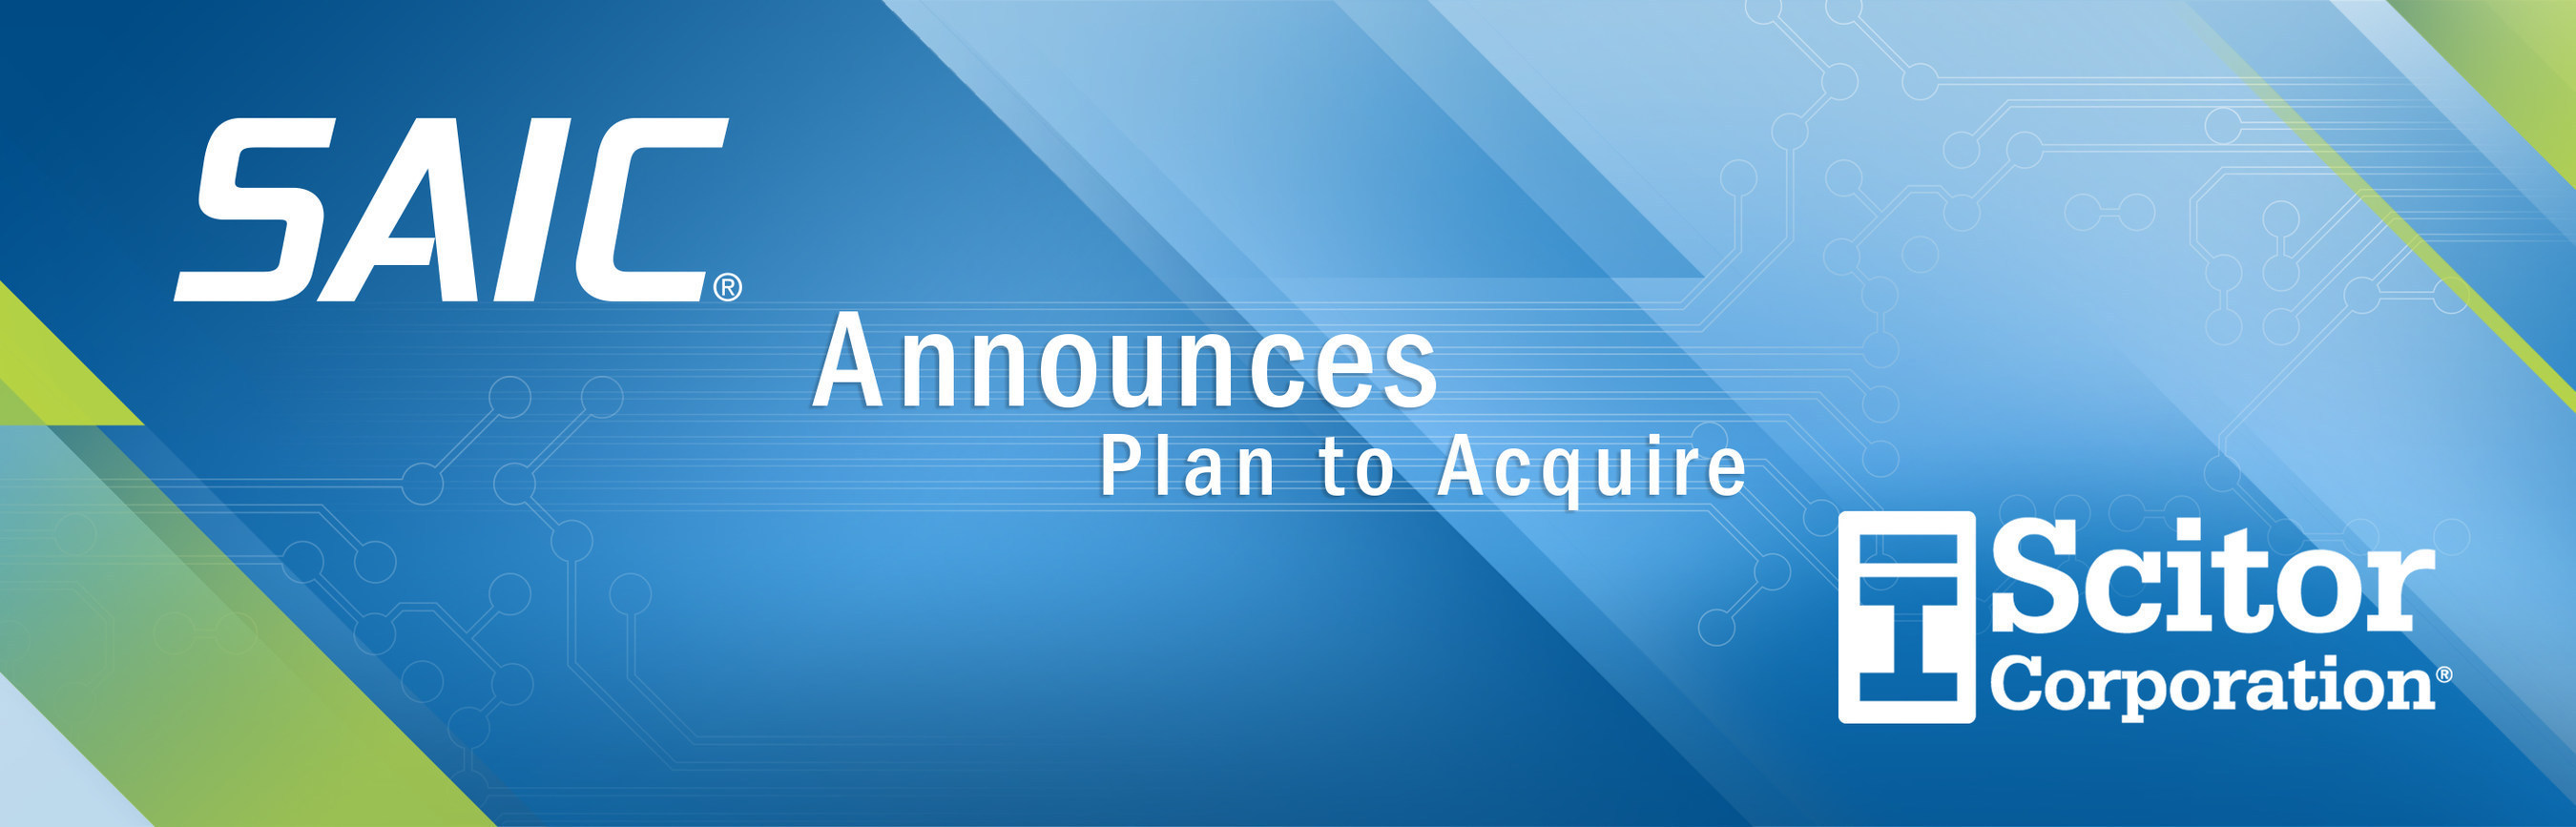 SAIC has entered into a definitive agreement to acquire Scitor Corp.